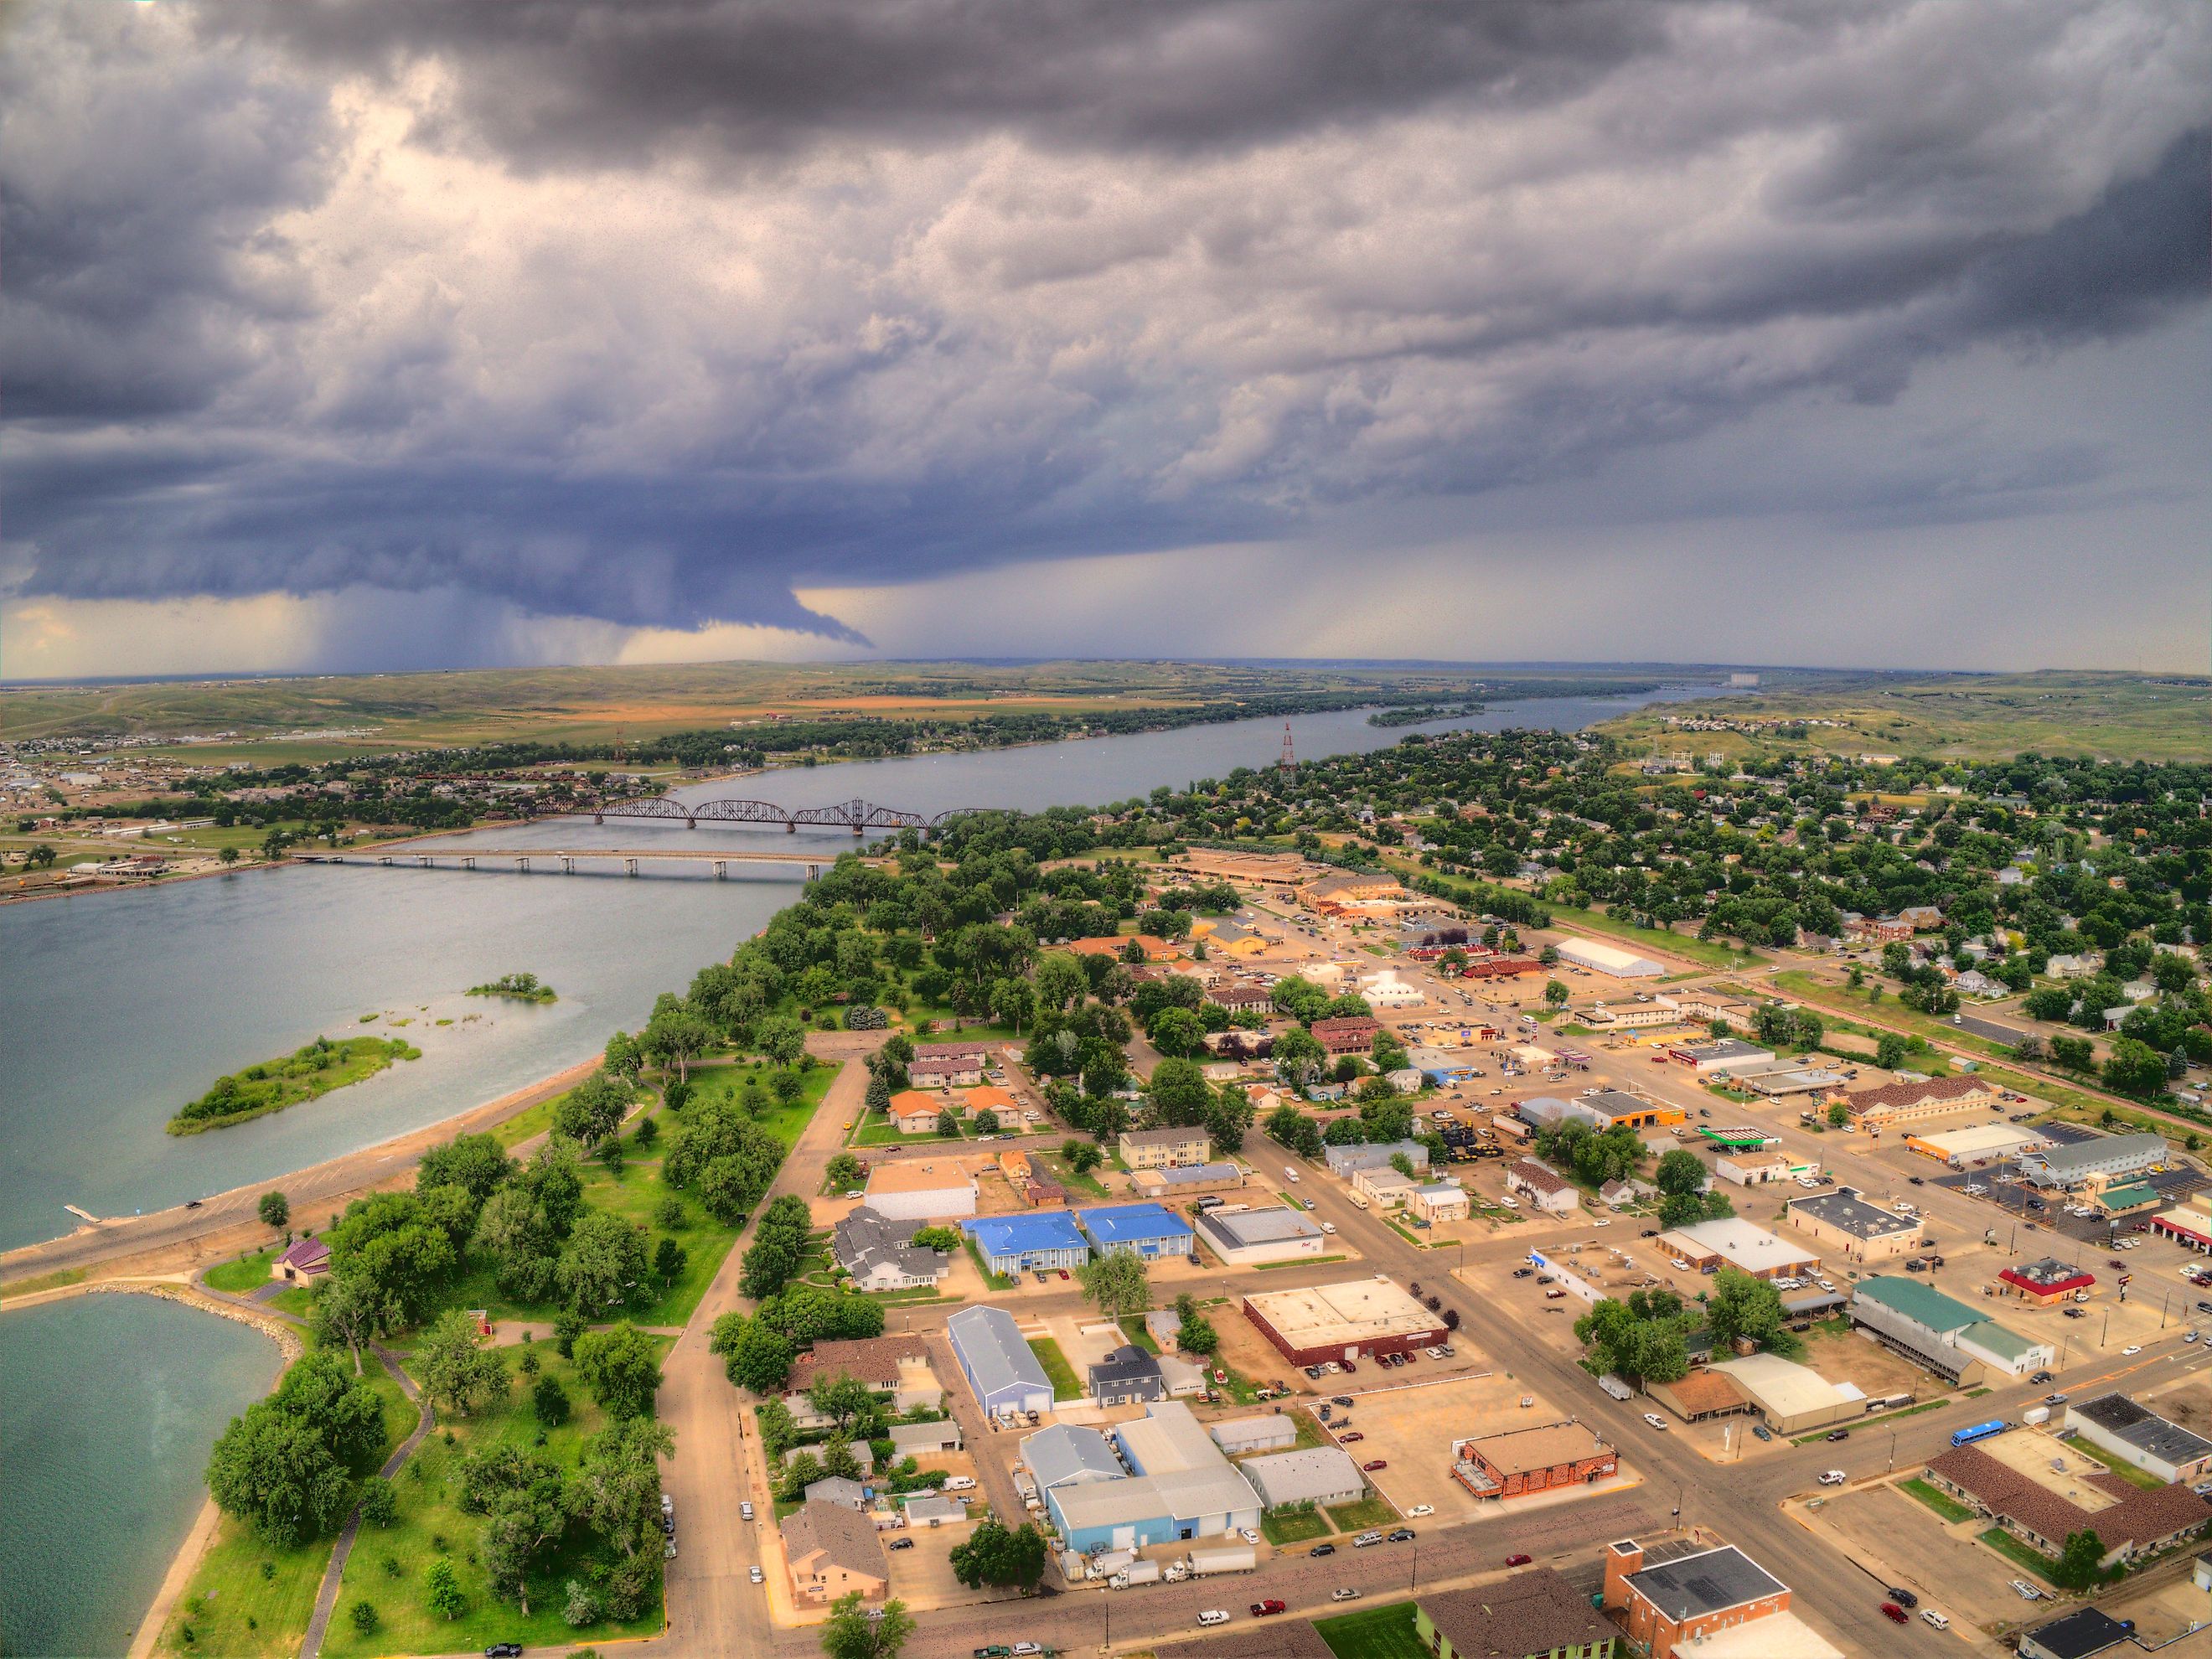 Aerial view of Pierre, the state capitol of South Dakota.